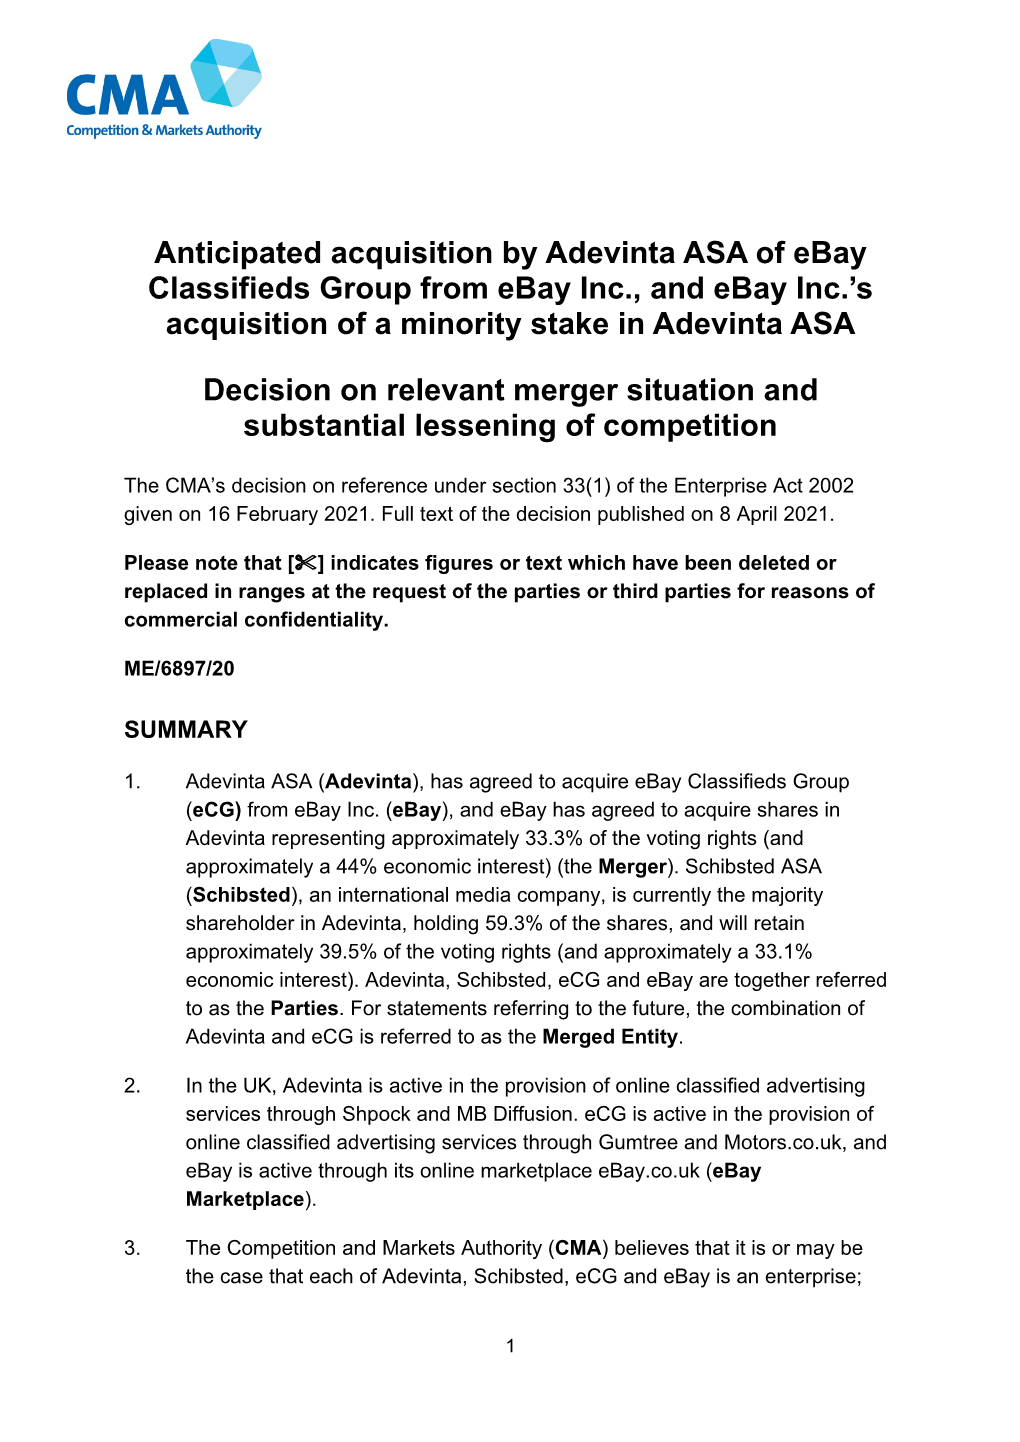 Anticipated Acquisition by Adevinta ASA of Ebay Classifieds Group from Ebay Inc., and Ebay Inc.’S Acquisition of a Minority Stake in Adevinta ASA